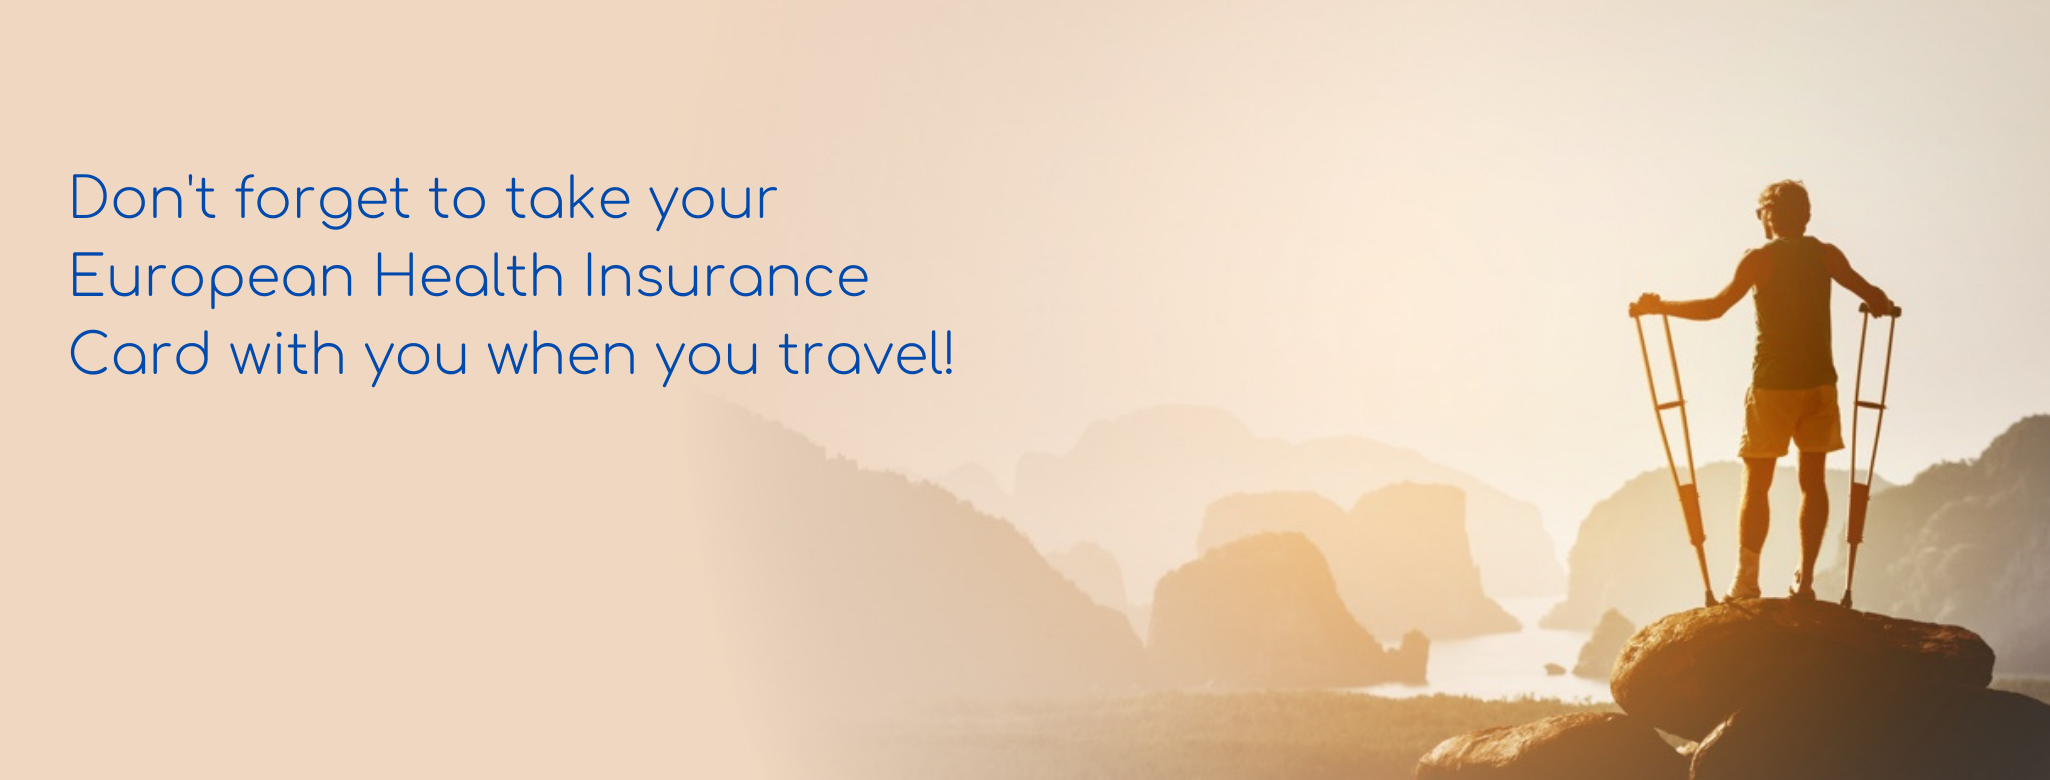 Don't forget to take your European Health Insurance Card with you when you travel!